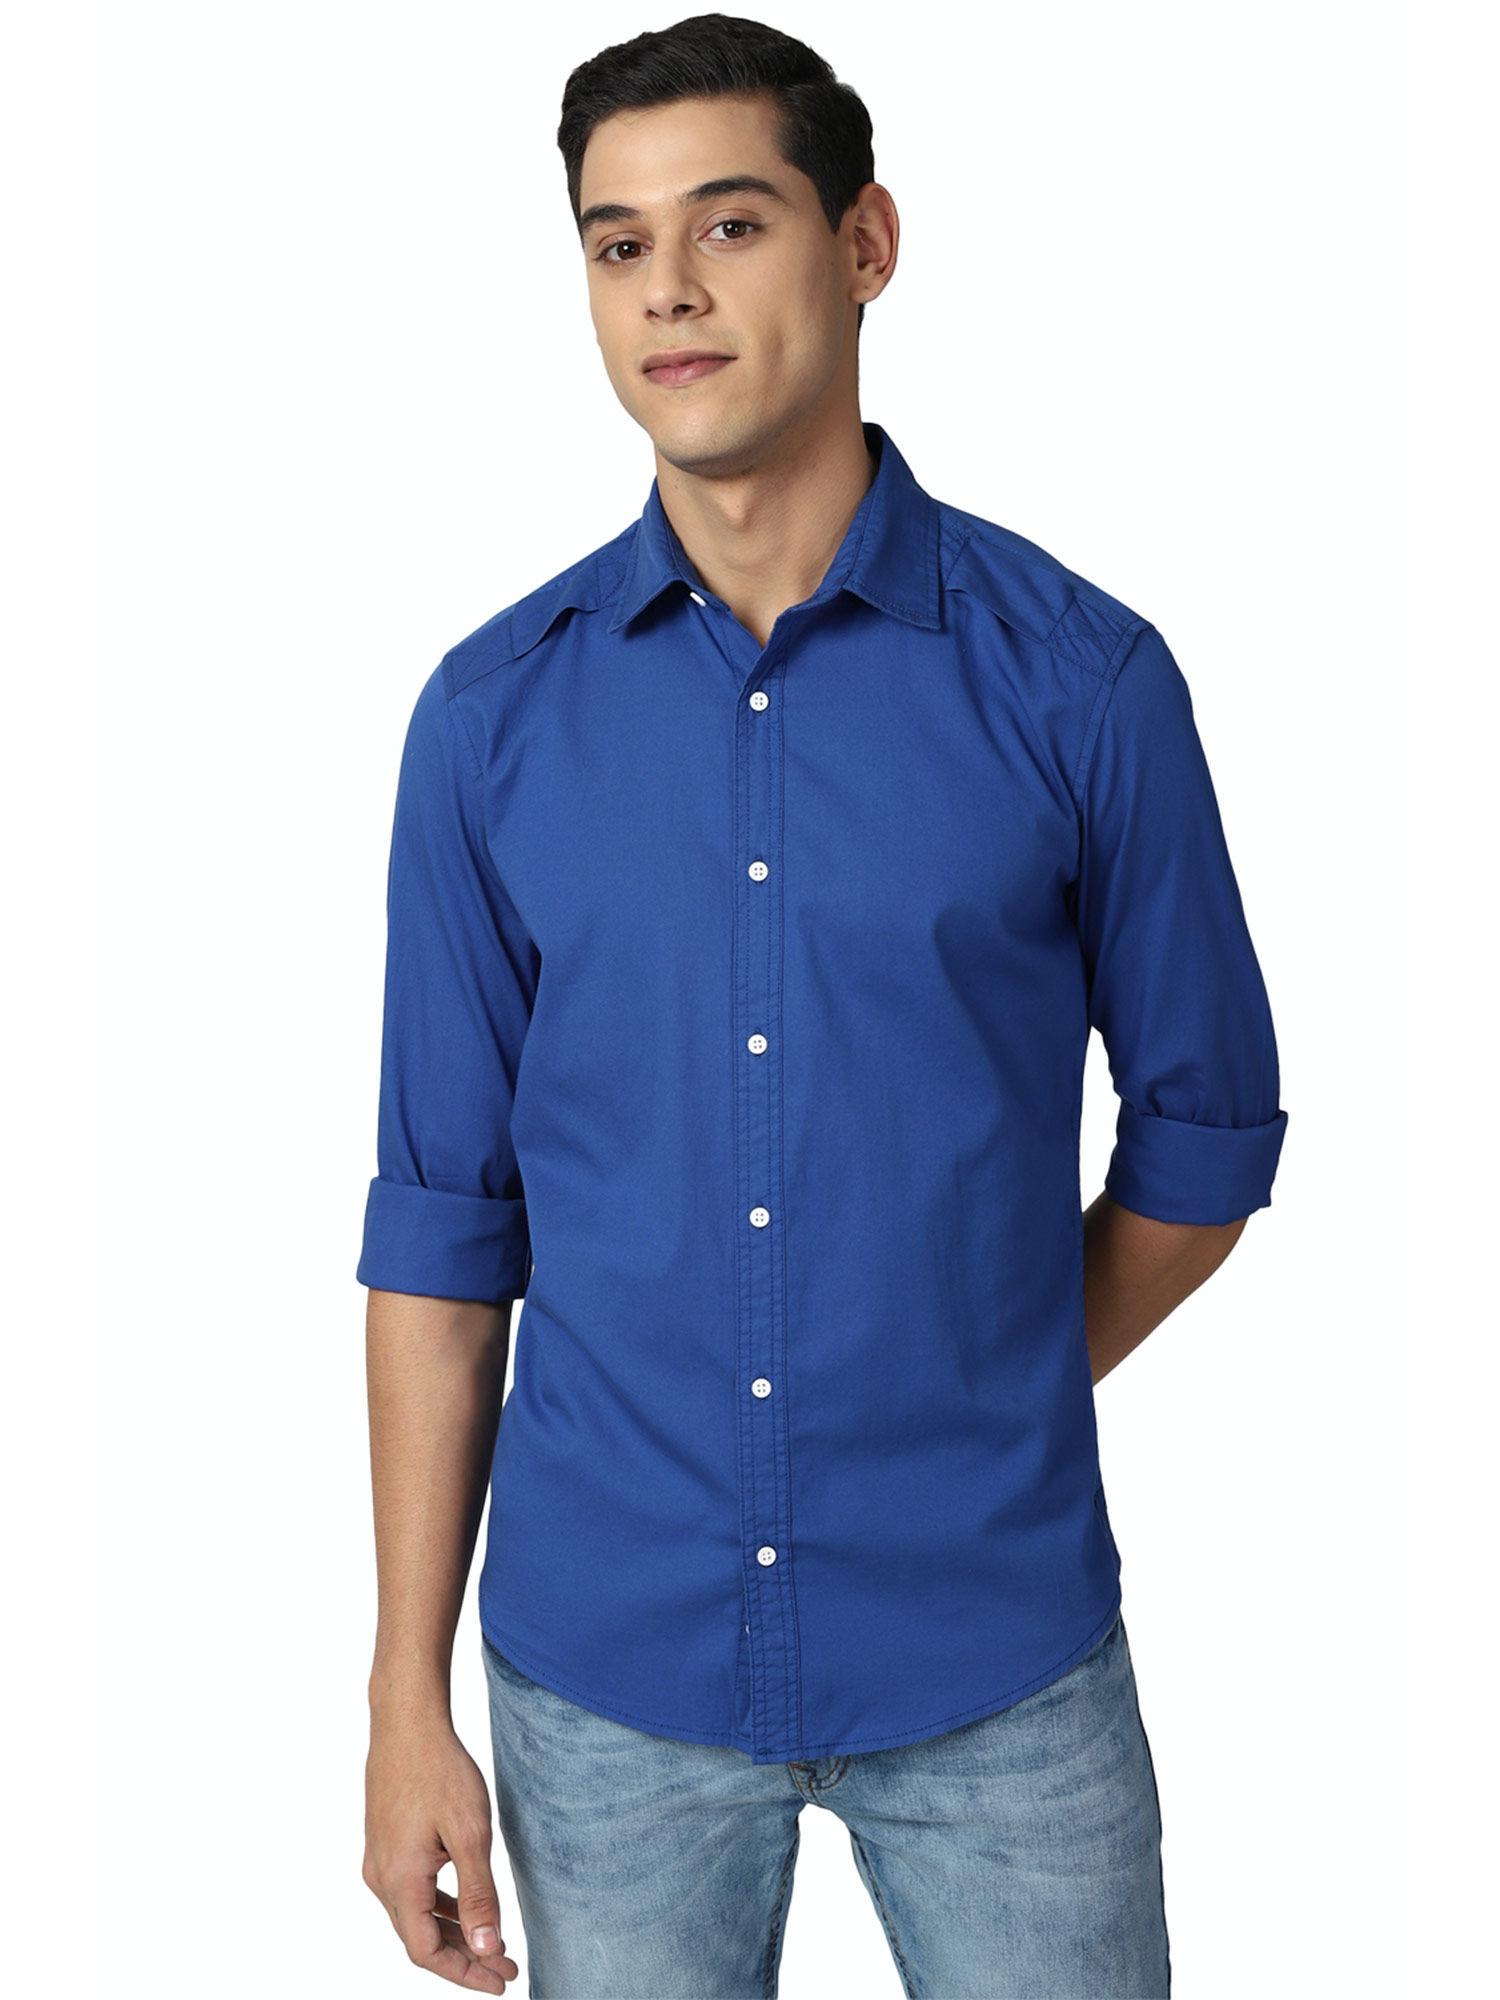 peter-england-blue-full-sleeves-casual-shirt